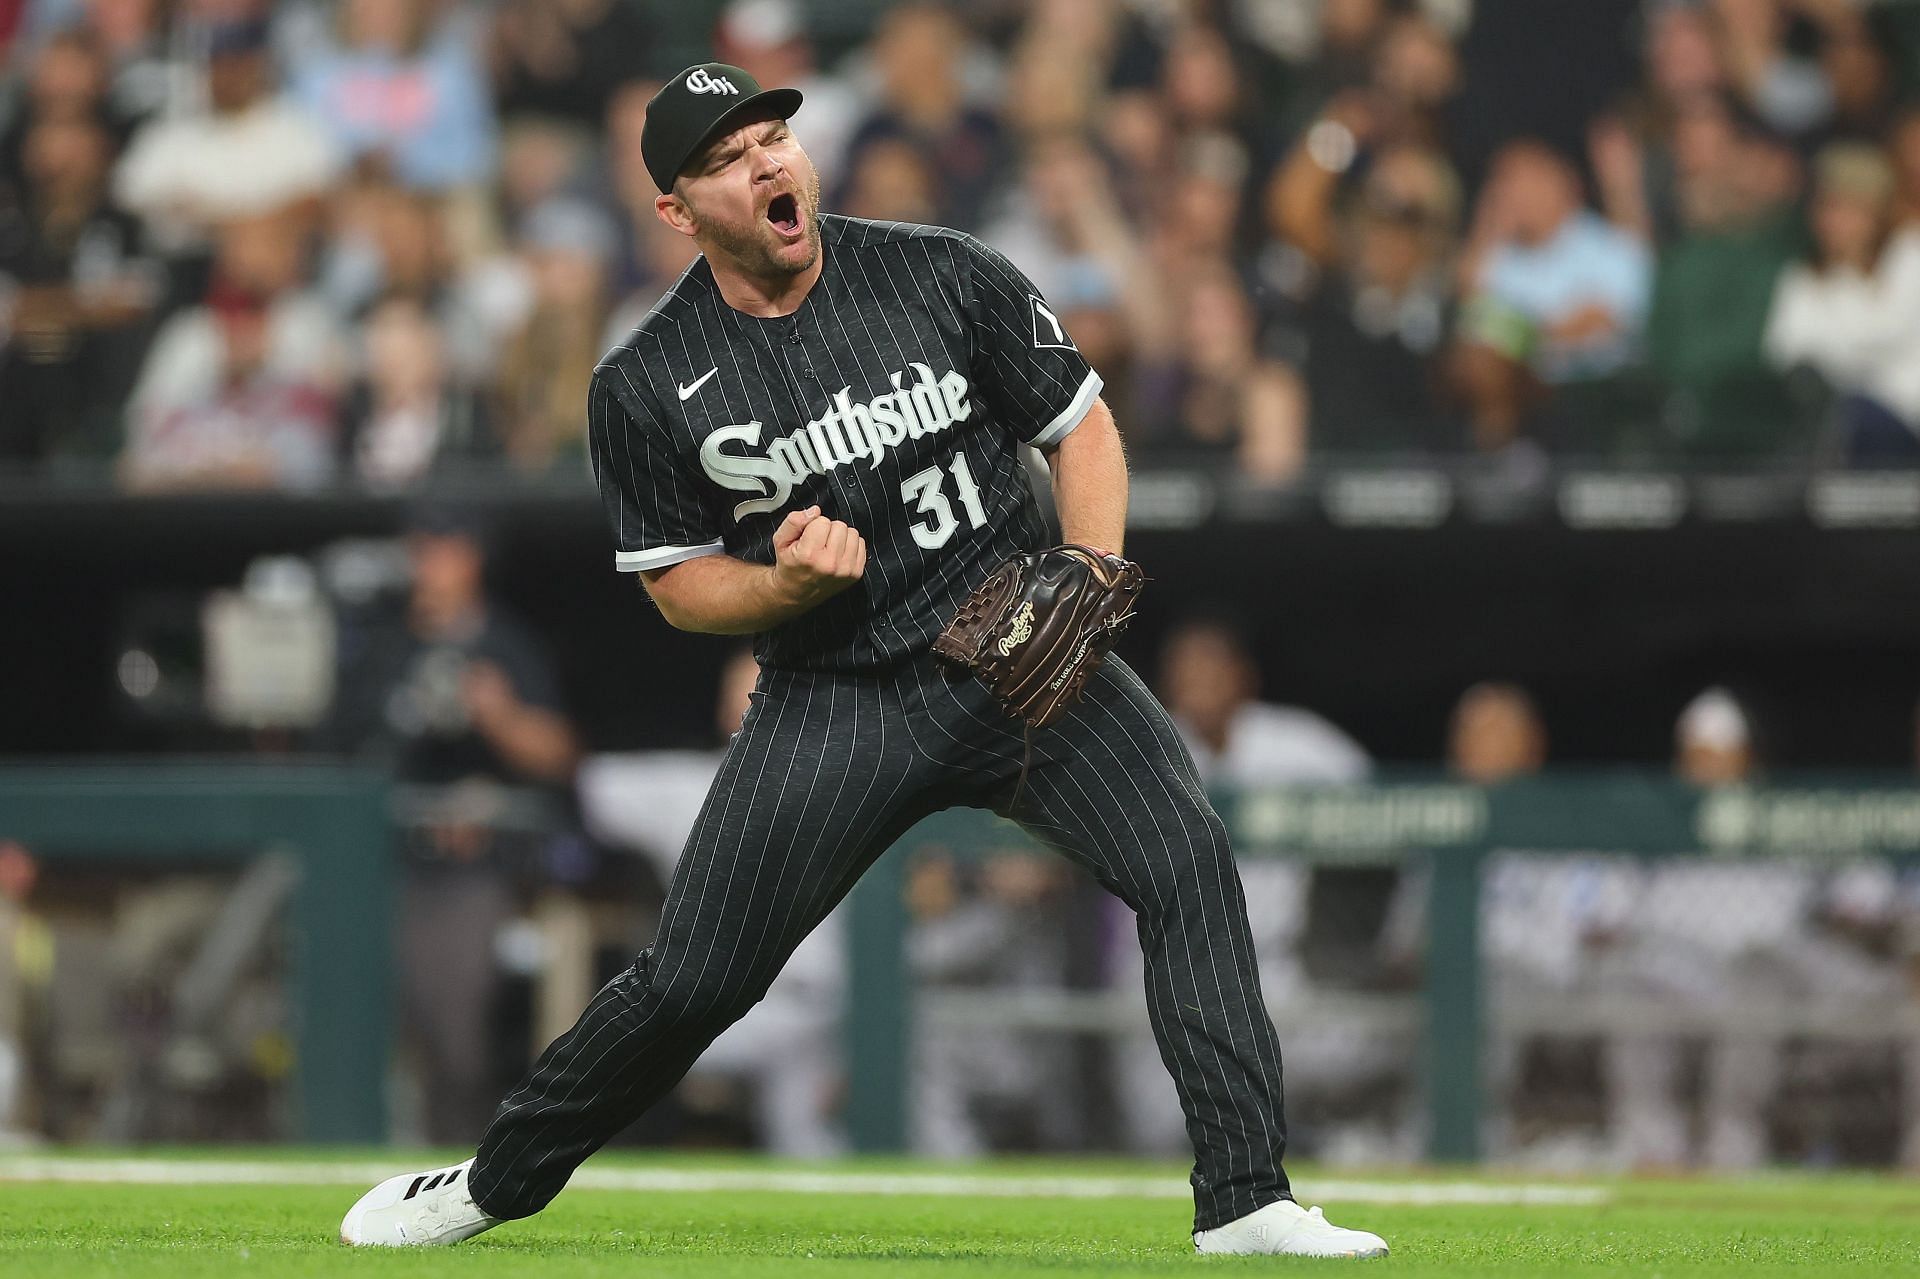 Liam Hendriks of the Chicago White Sox